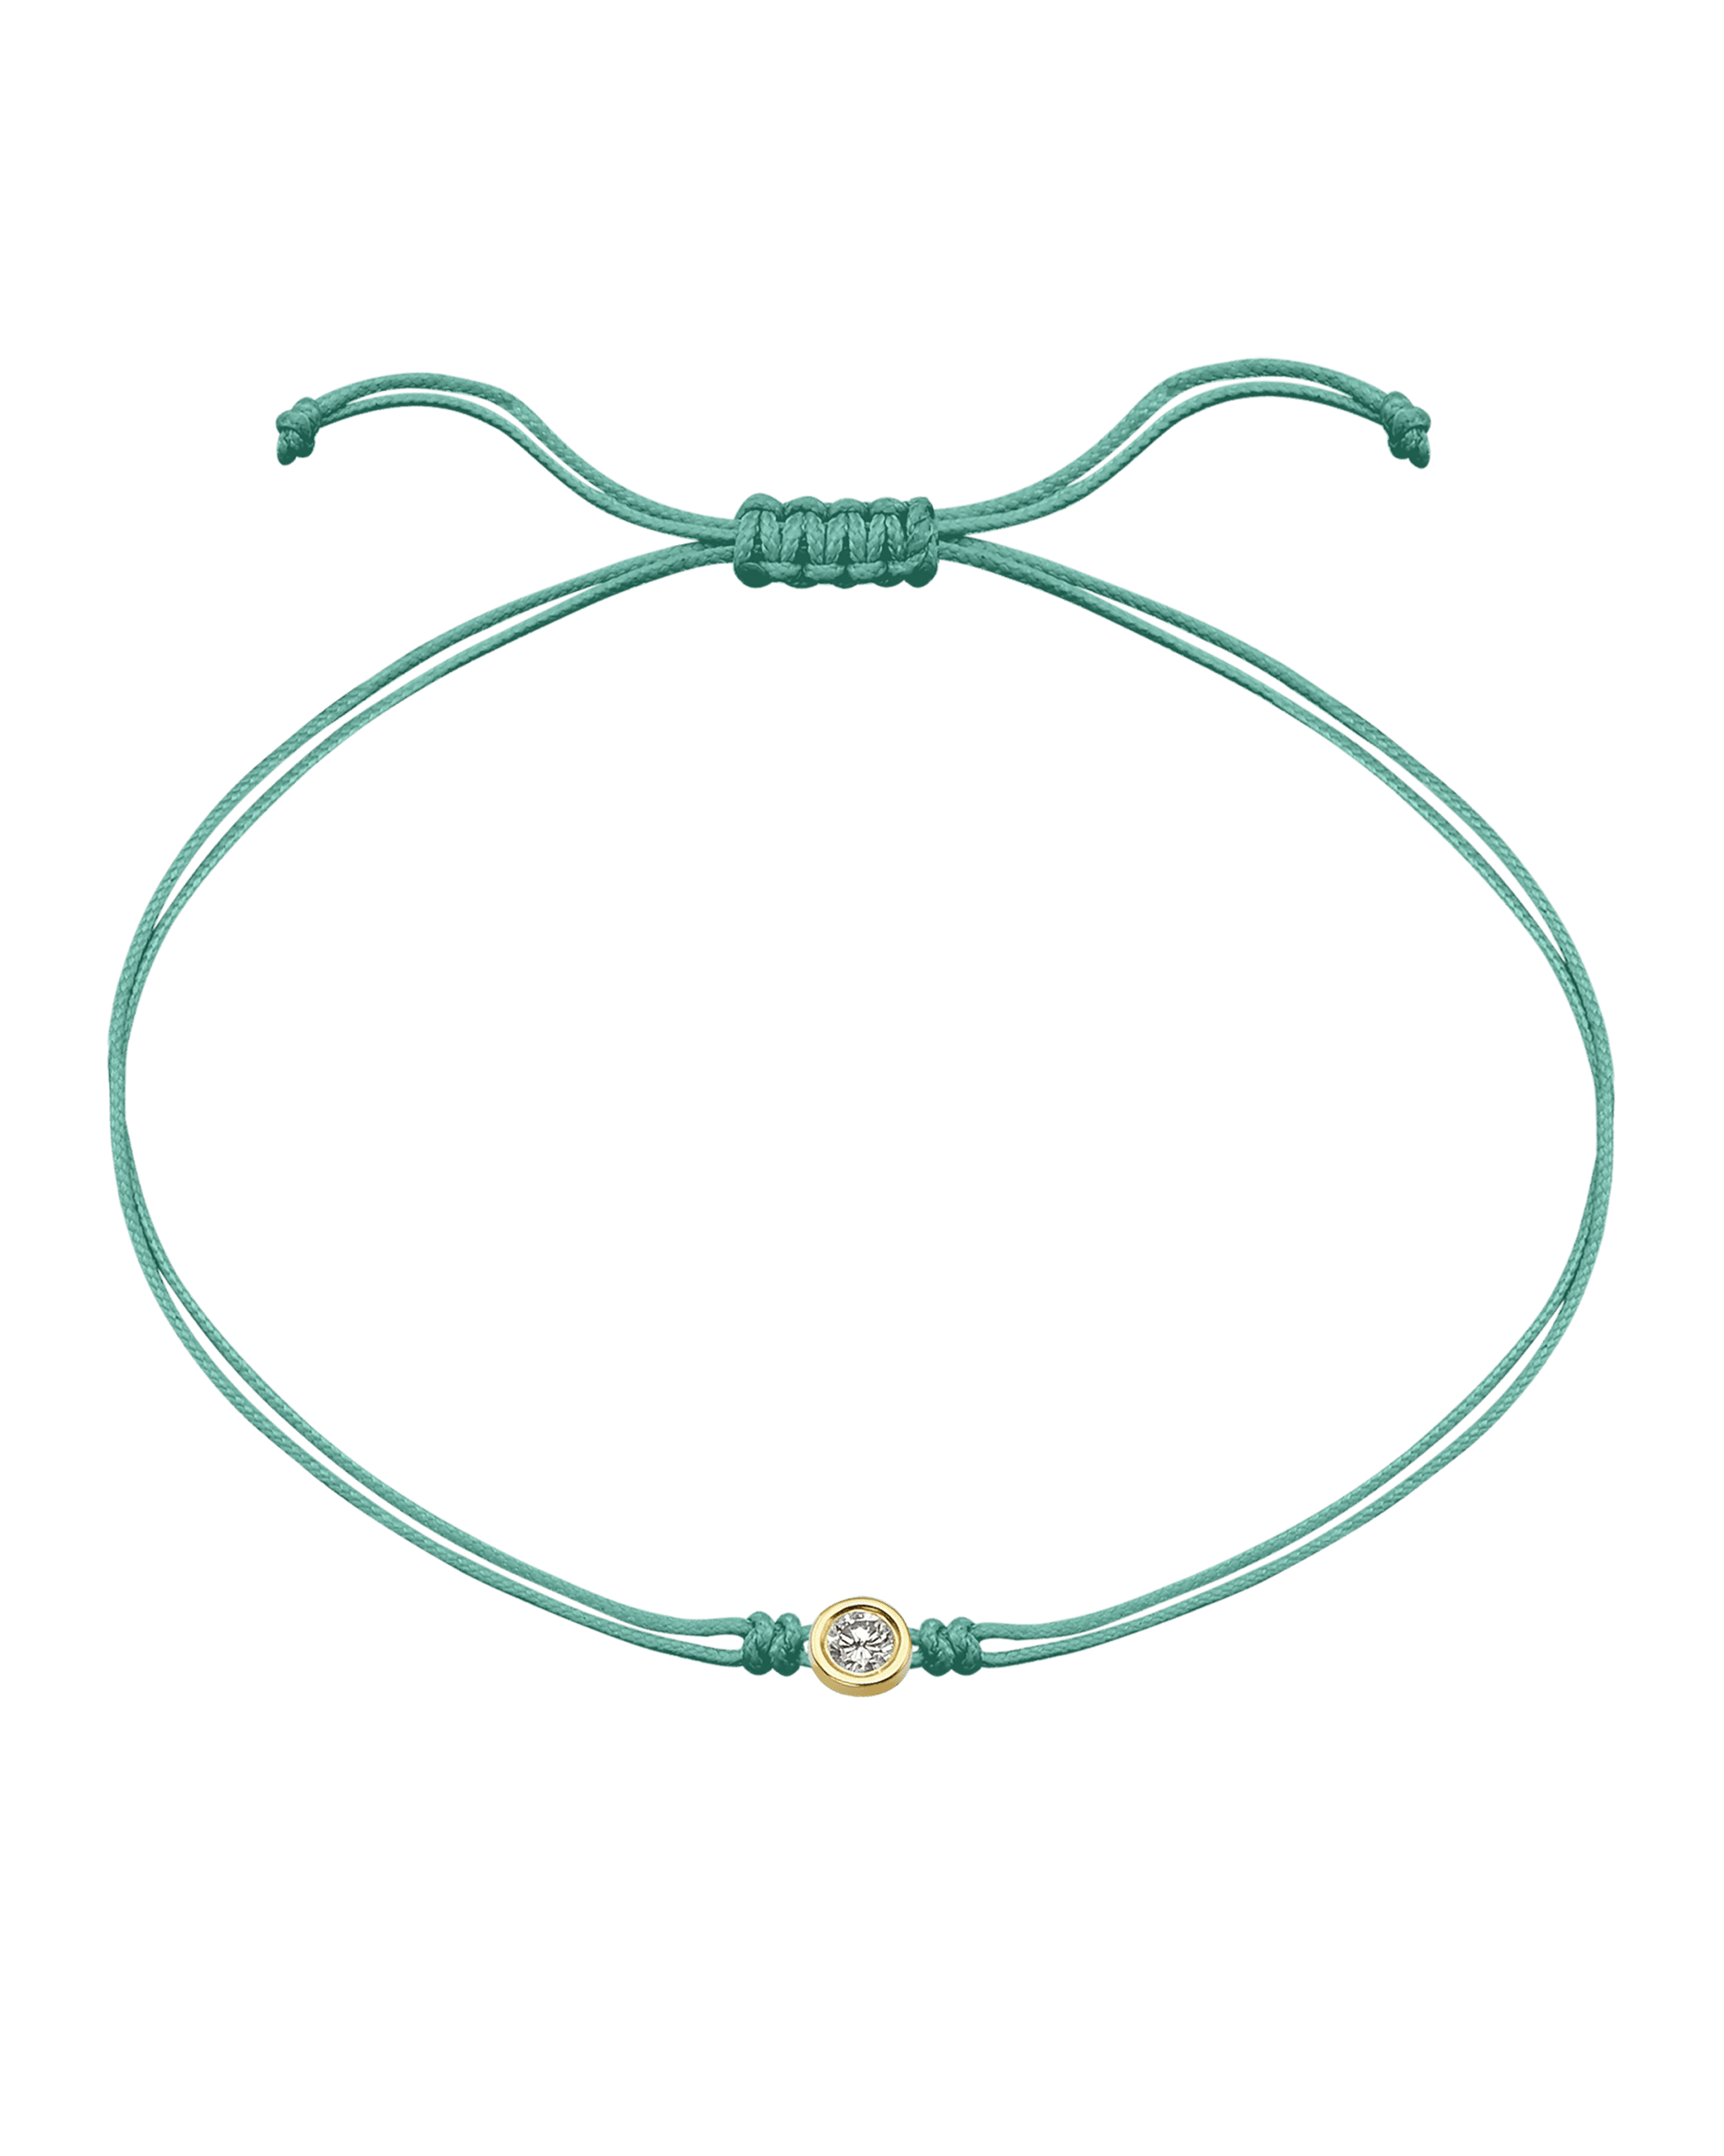 Summer Edition : The Classic String of Love - 14K Yellow Gold Bracelets magal-dev Apple Martini - Light Green Large: 0.10ct 